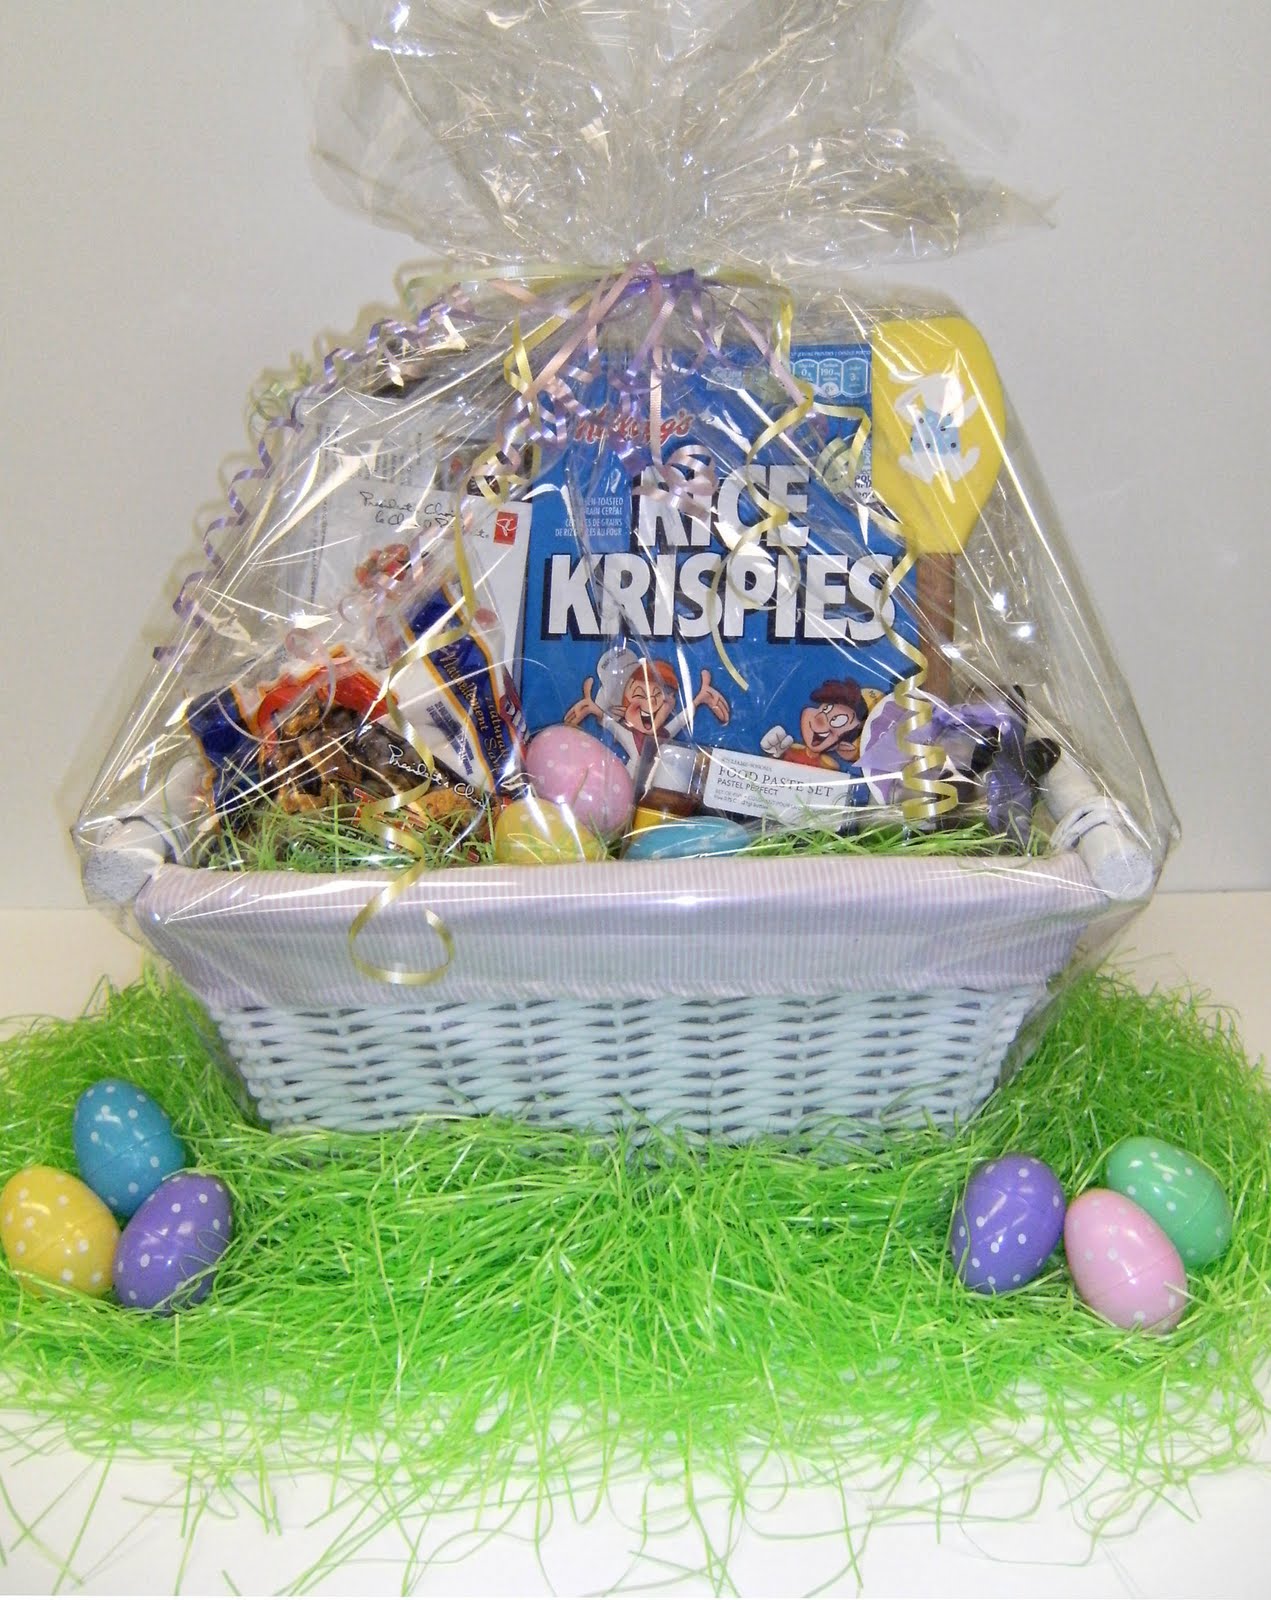 Loulou's Reviews: Easter Rice Krispies Giveaway!